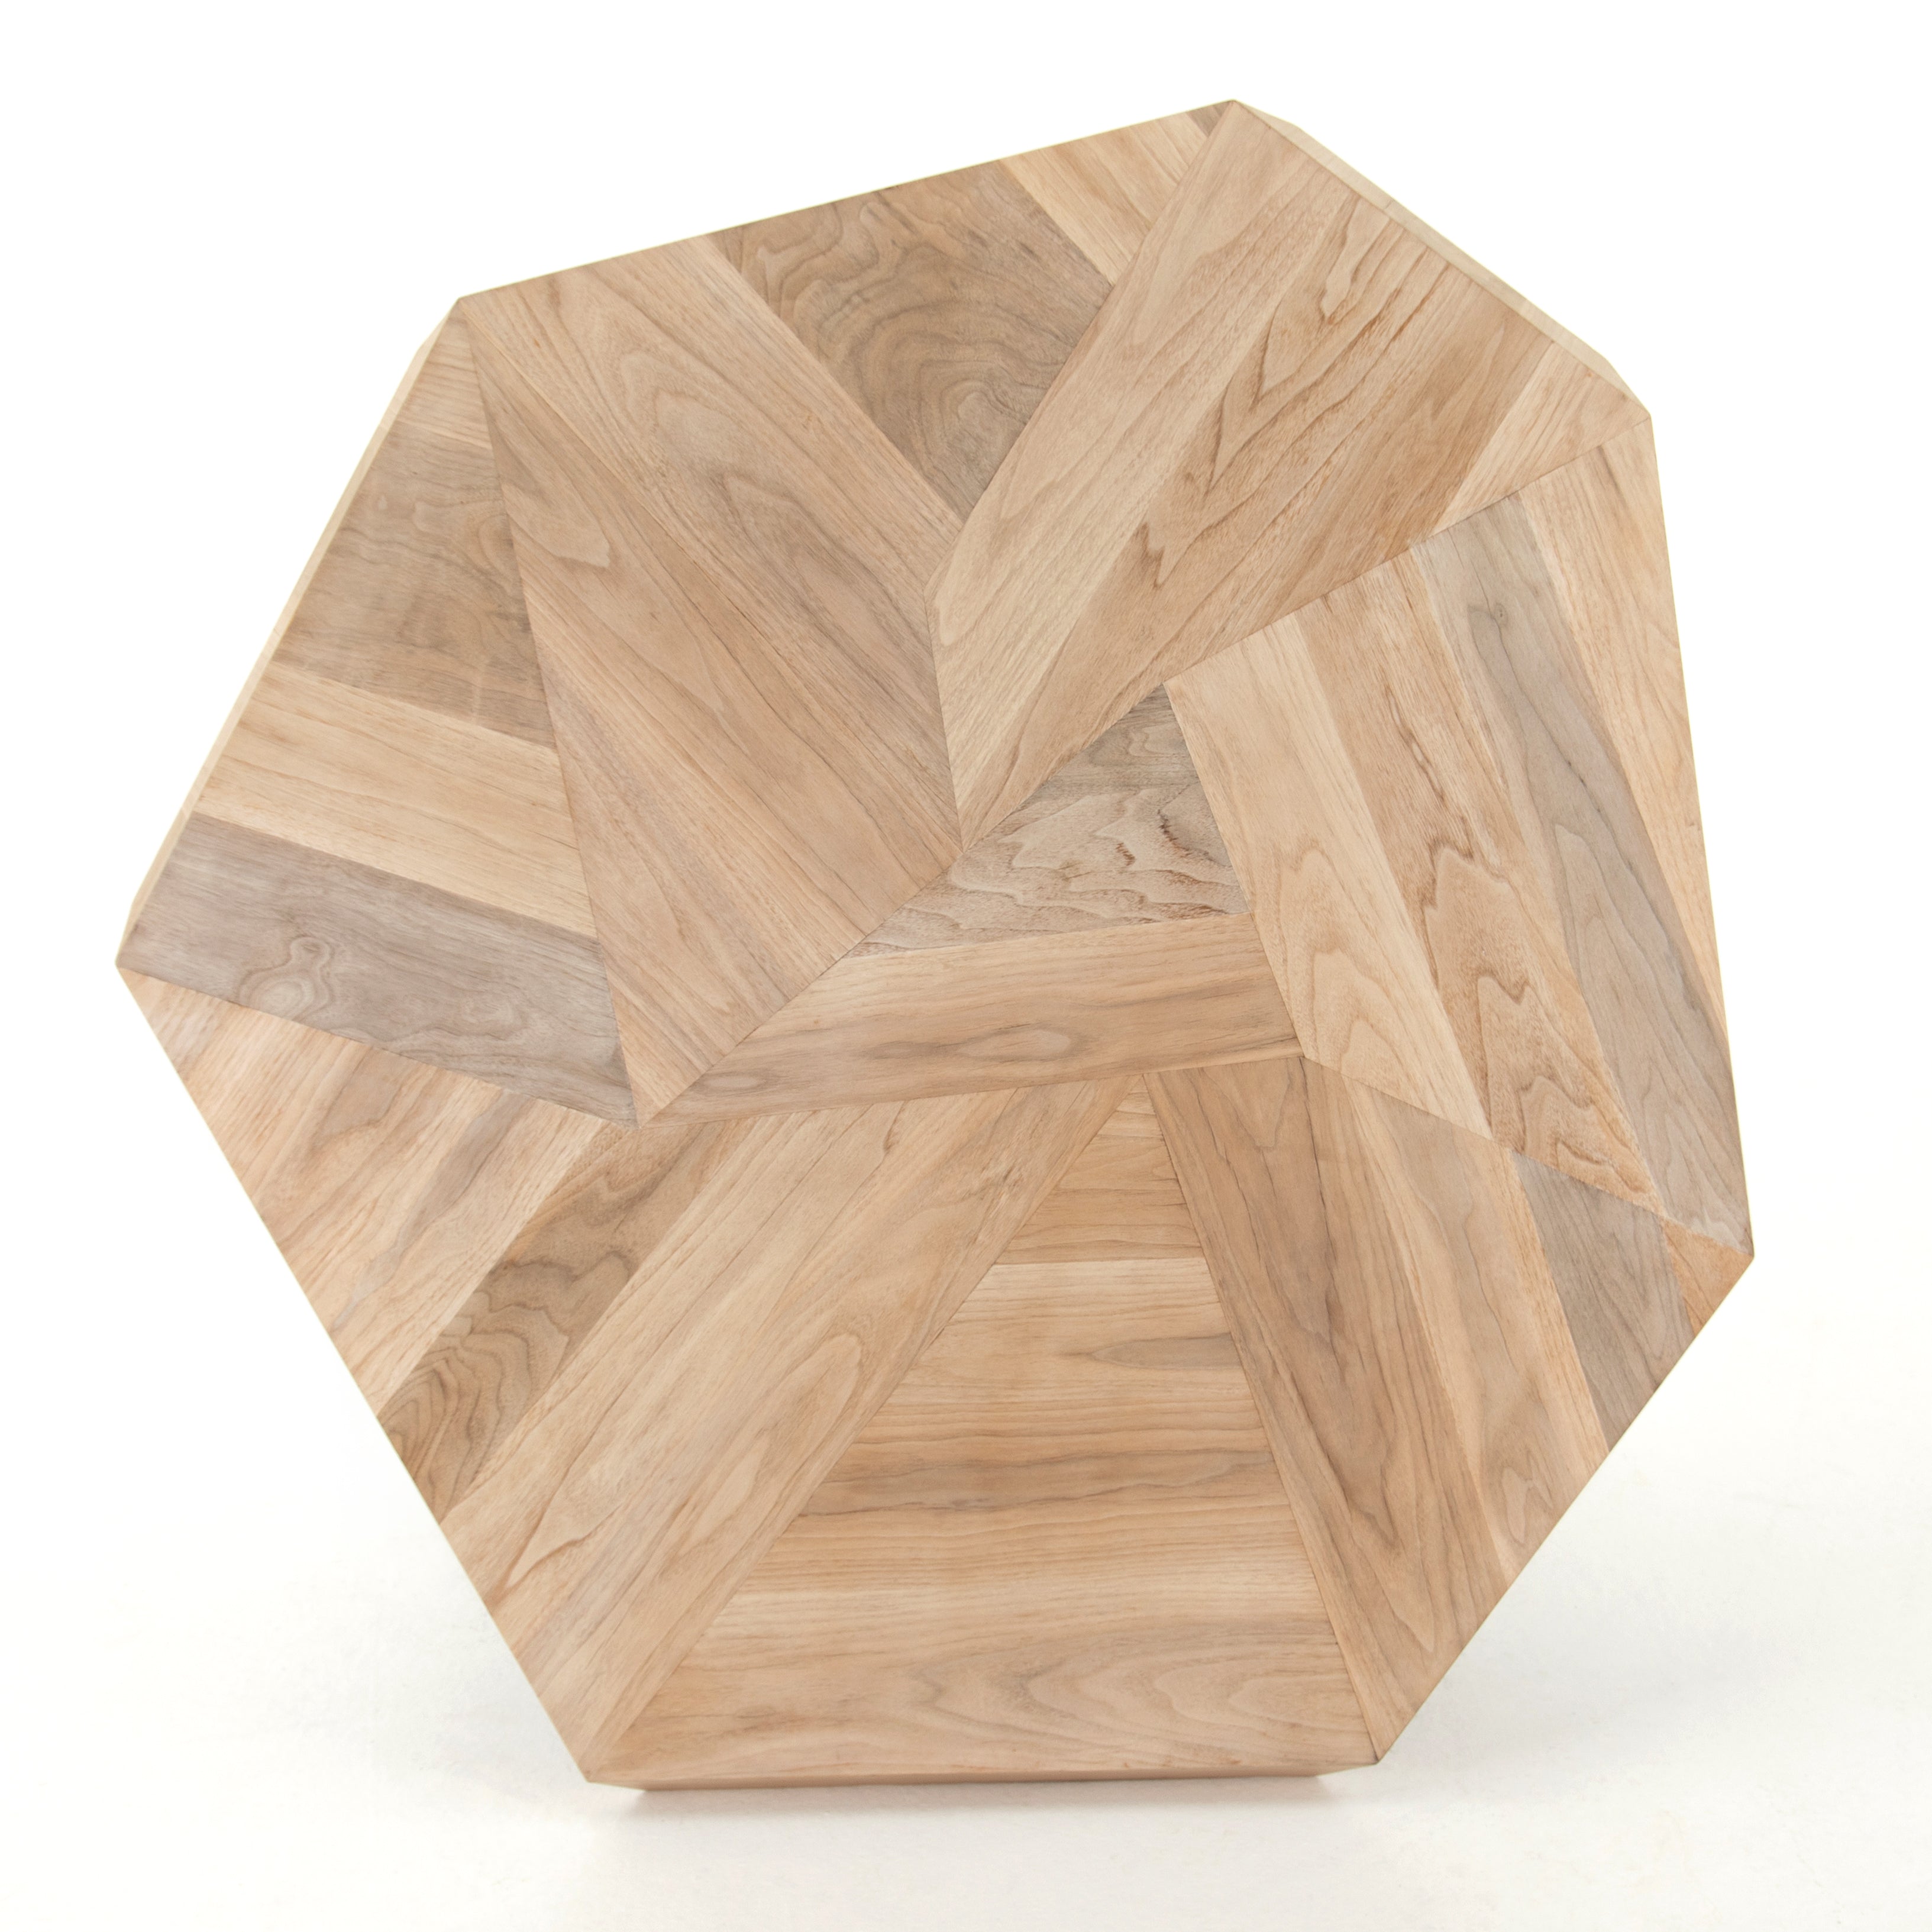 We love the asymmetric sides that form a casual octagon in this Brooklyn Coffee Table - Ashen Walnut. A shape-centric statement piece to add to your living room or lounge area.  Each style slightly unique, thanks to materials' natural quality.  Overall Dimensions: 53.25"w x 50.75"d x 16.50"h